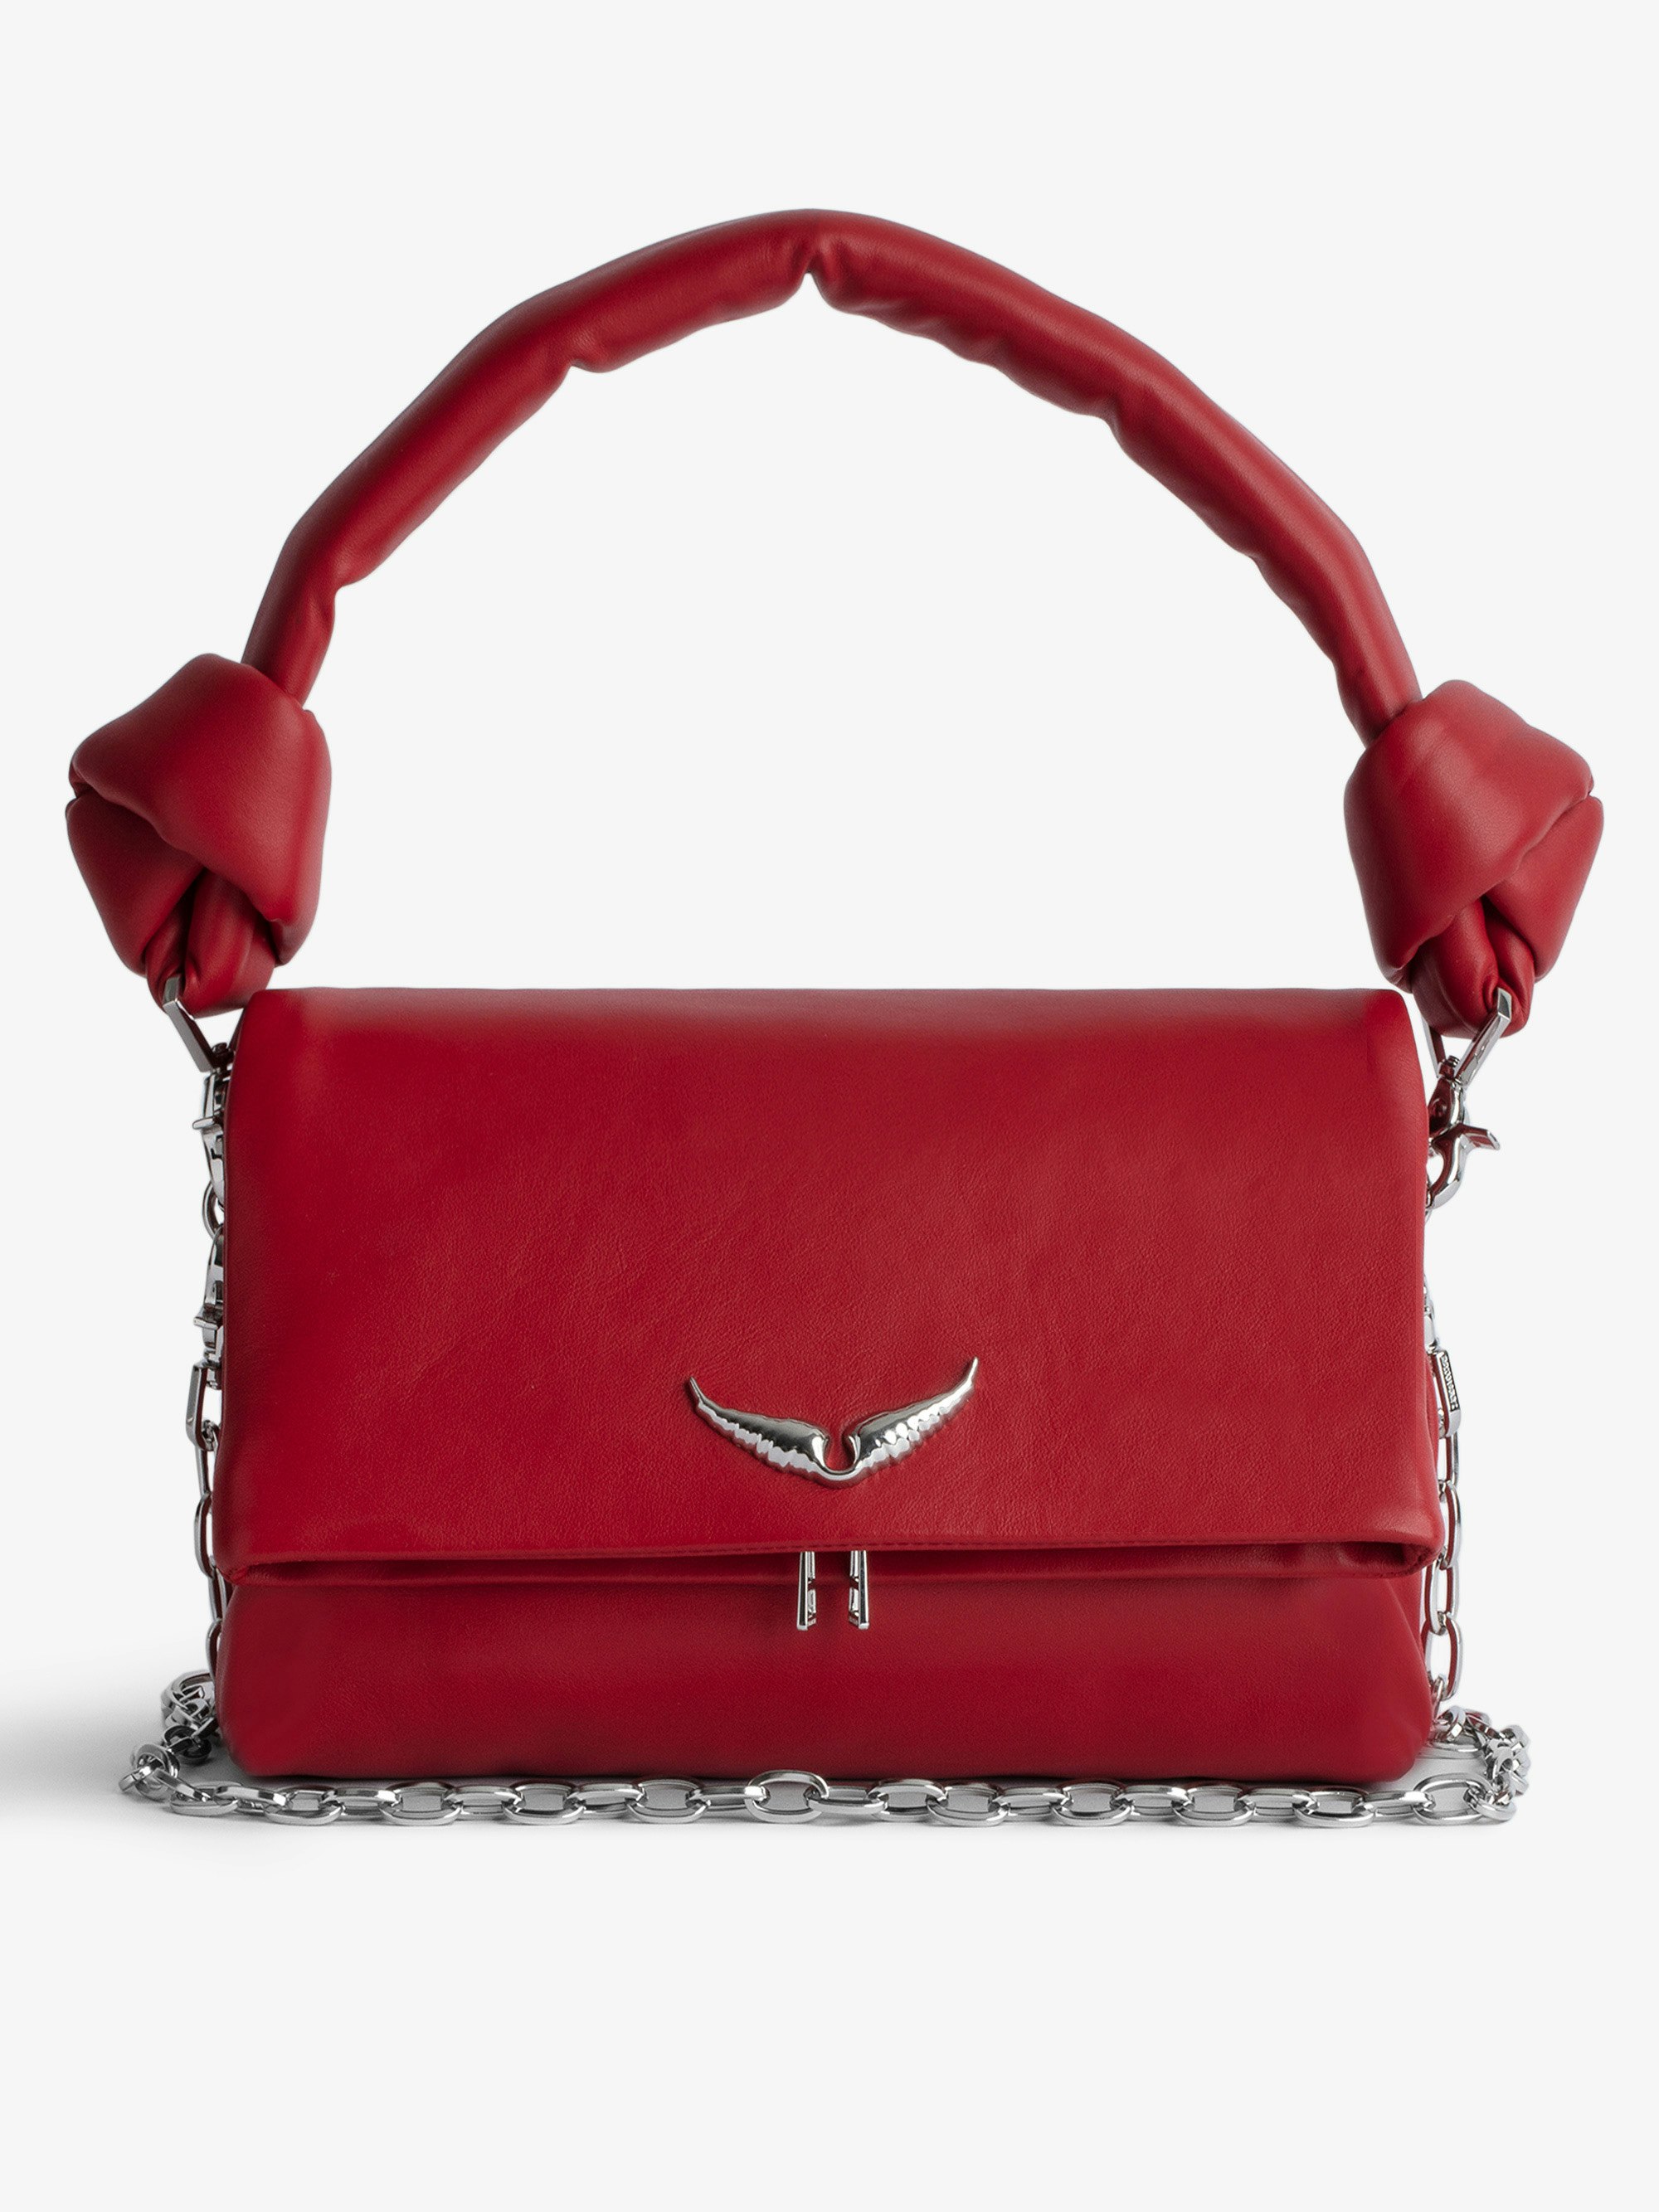 Rocky Eternal Bag - Red smooth leather bag with tied strap and chain shoulder strap.